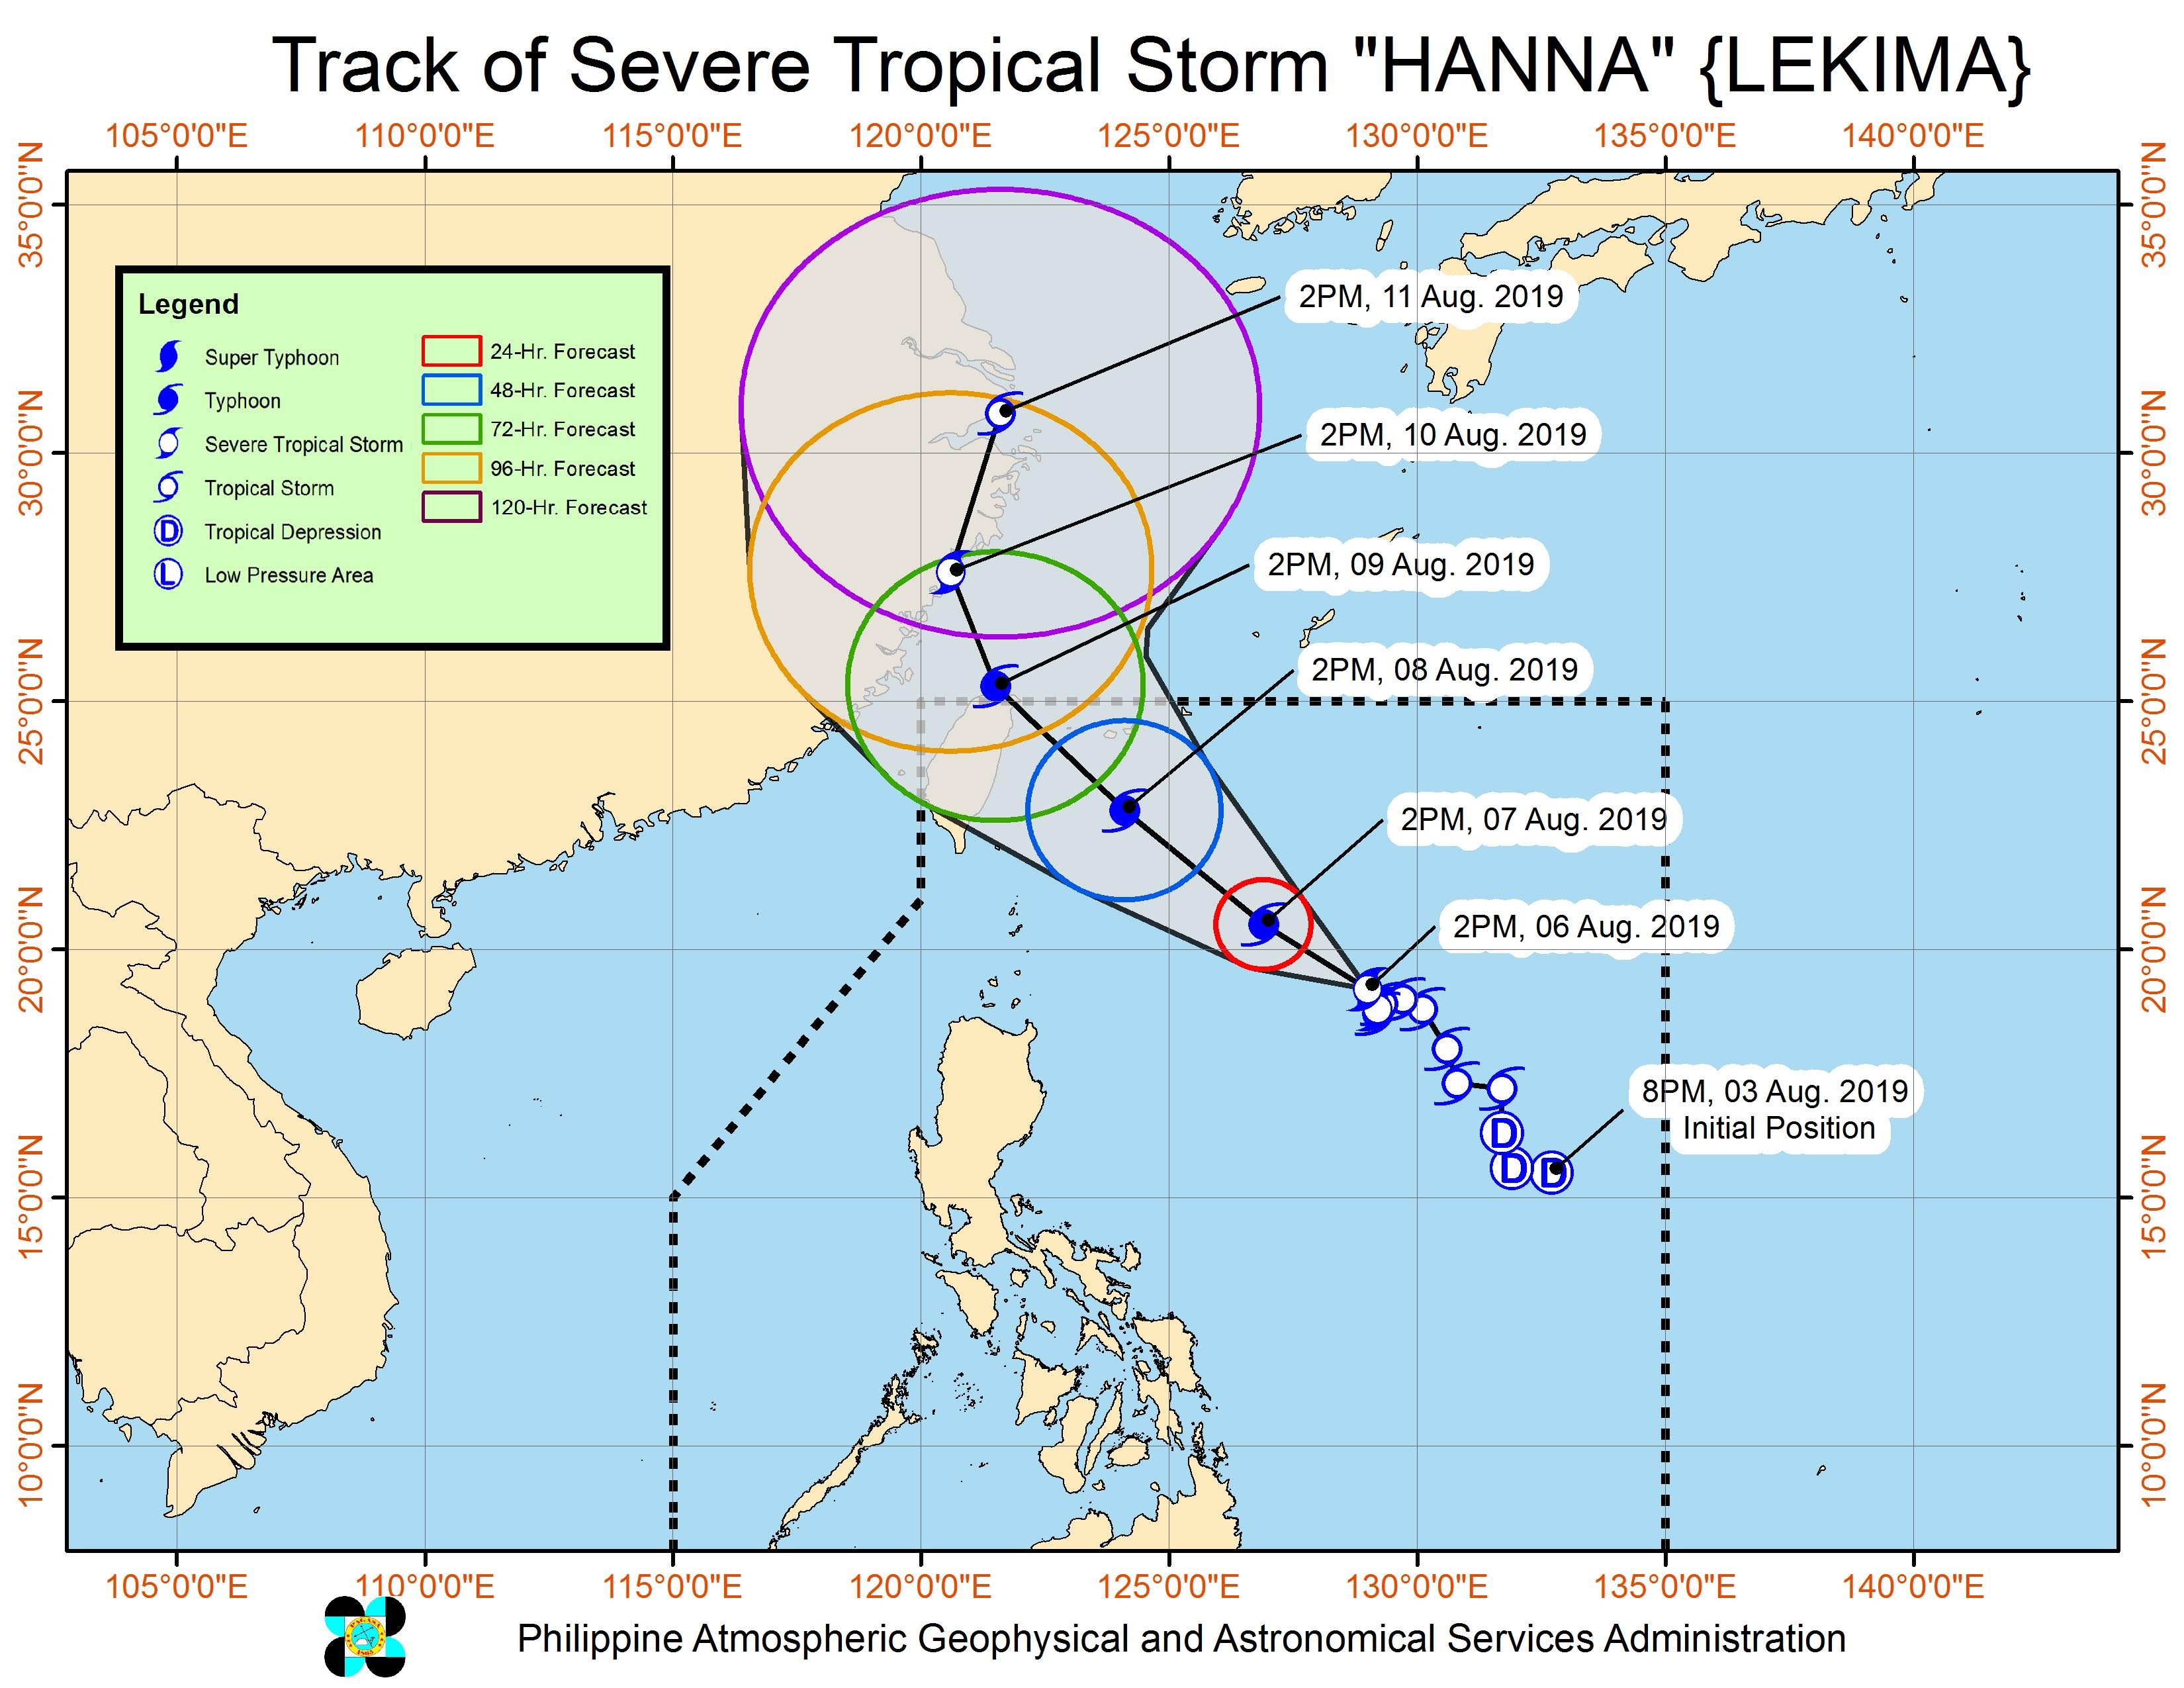 Forecast track of Severe Tropical Storm Hanna (Lekima) as of August 6, 2019, 5 pm. Image from PAGASA 